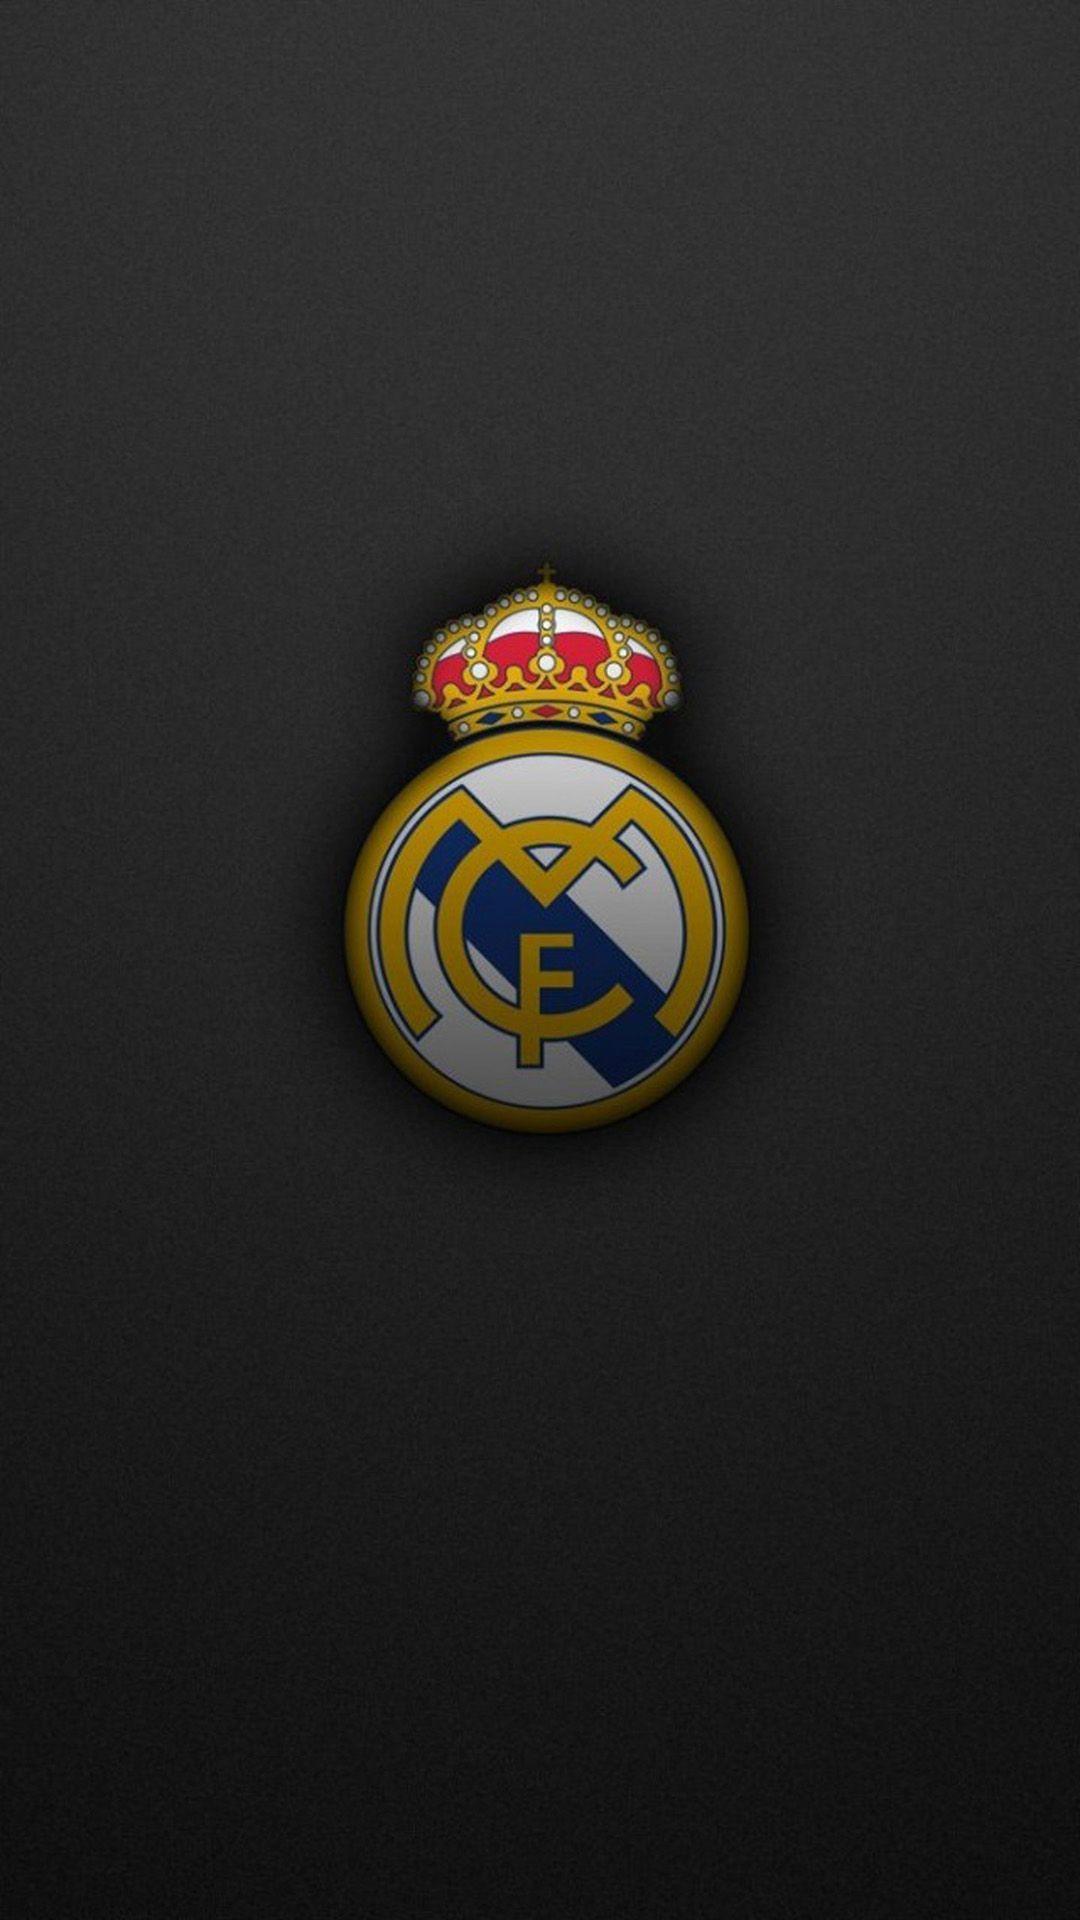 Real Madrid Wallpaper for iPhone iPhone 7 plus, iPhone 6 plus